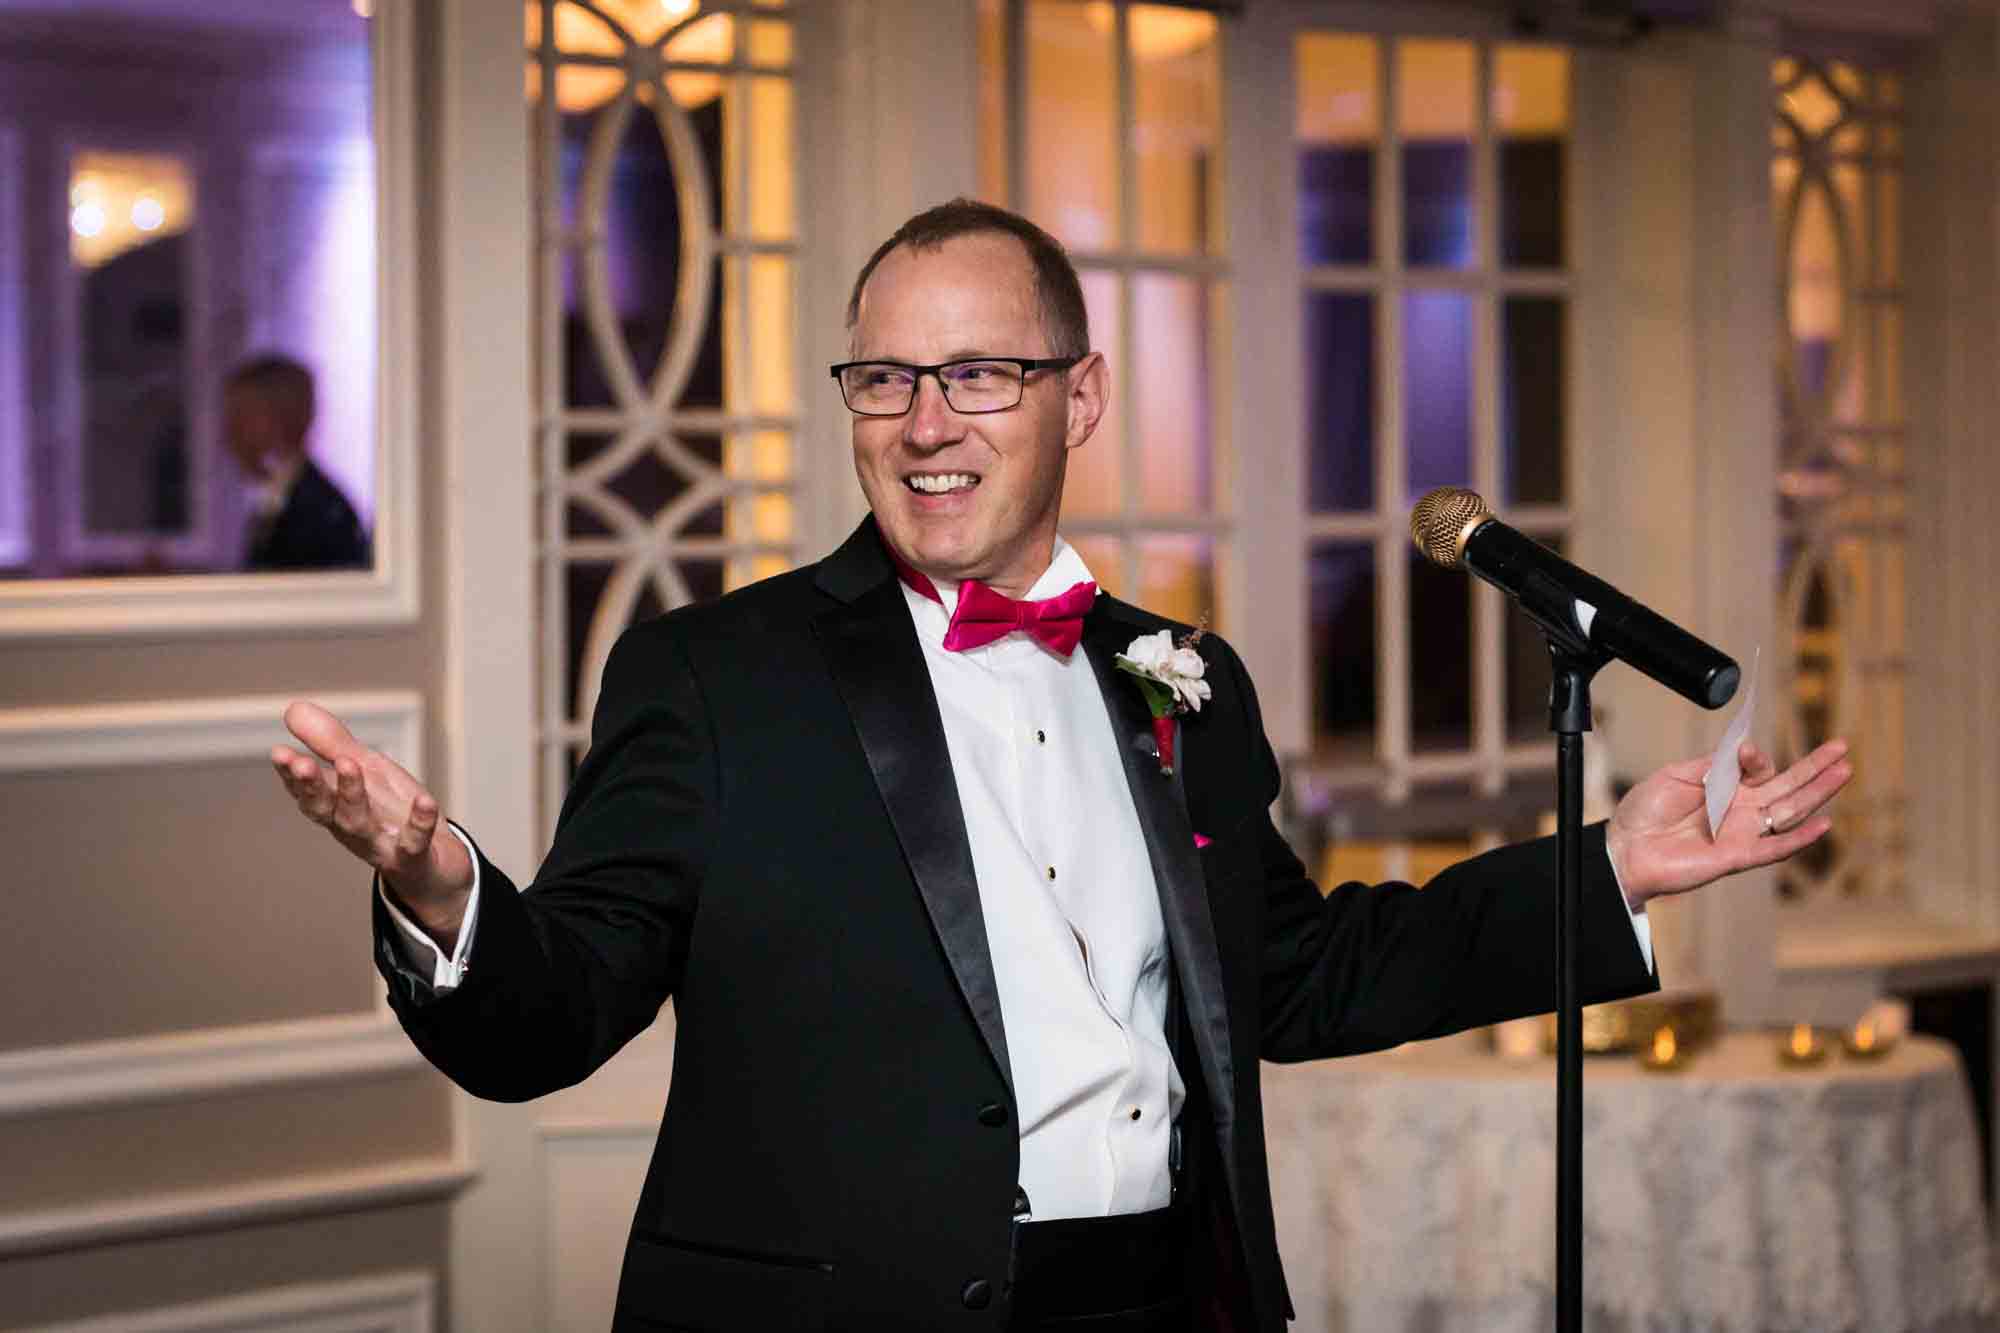 Father smiling with hands outstretched during speech at a Briarcliff Manor wedding